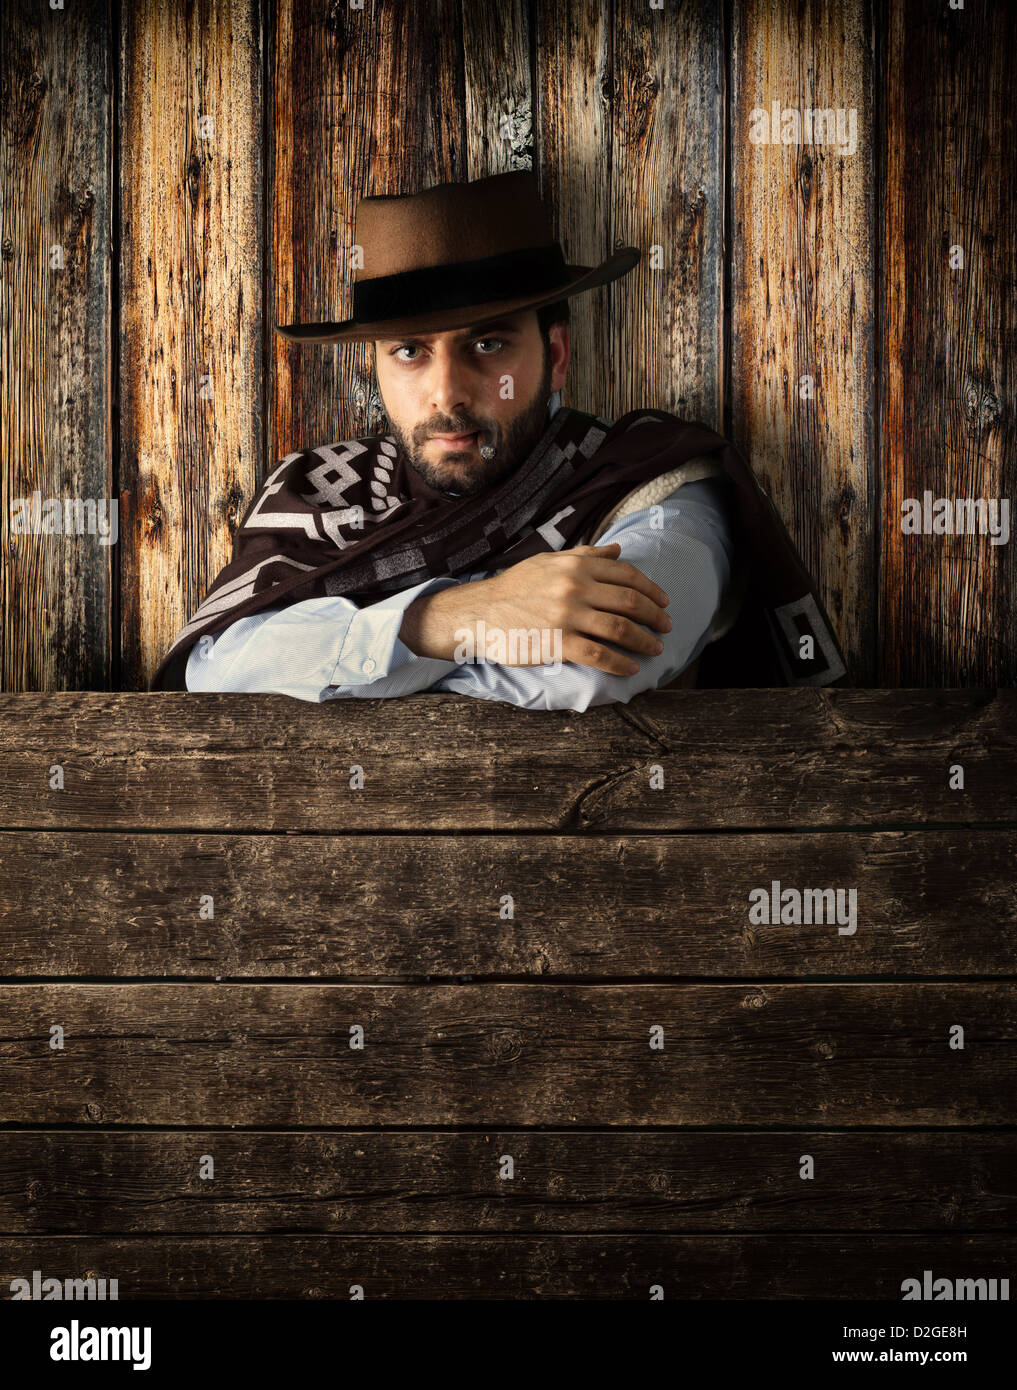 Bad gunman in the old wild west Stock Photo